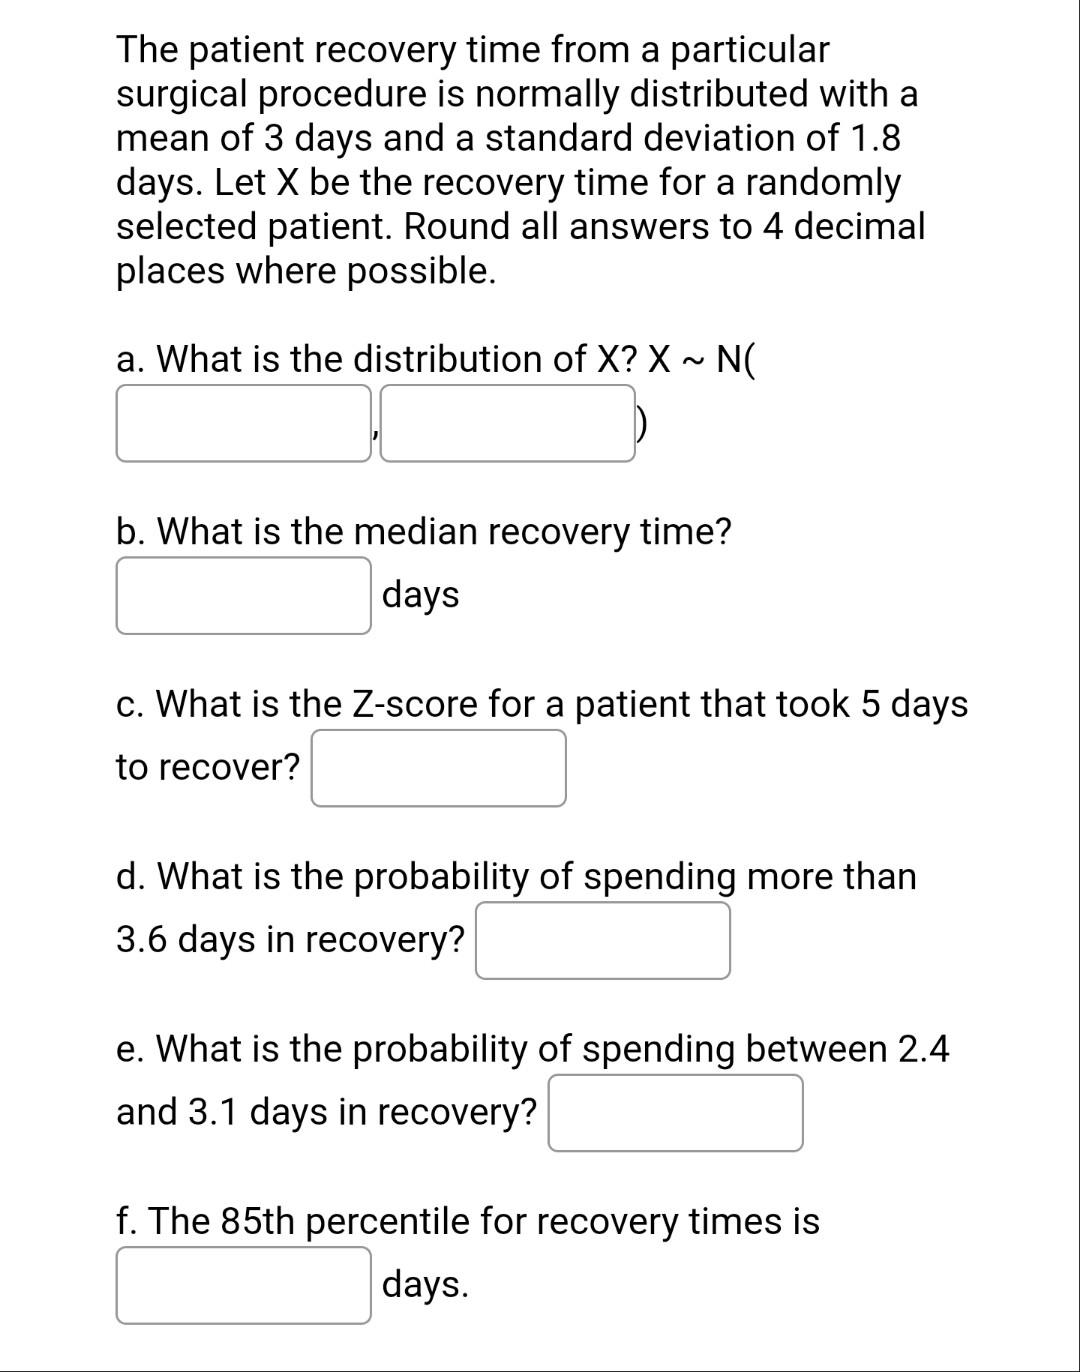 The Patient Recovery Time From A Particular Surgical Procedure Is Normally Distributed With A Mean Of 3 Days And A Stand 1